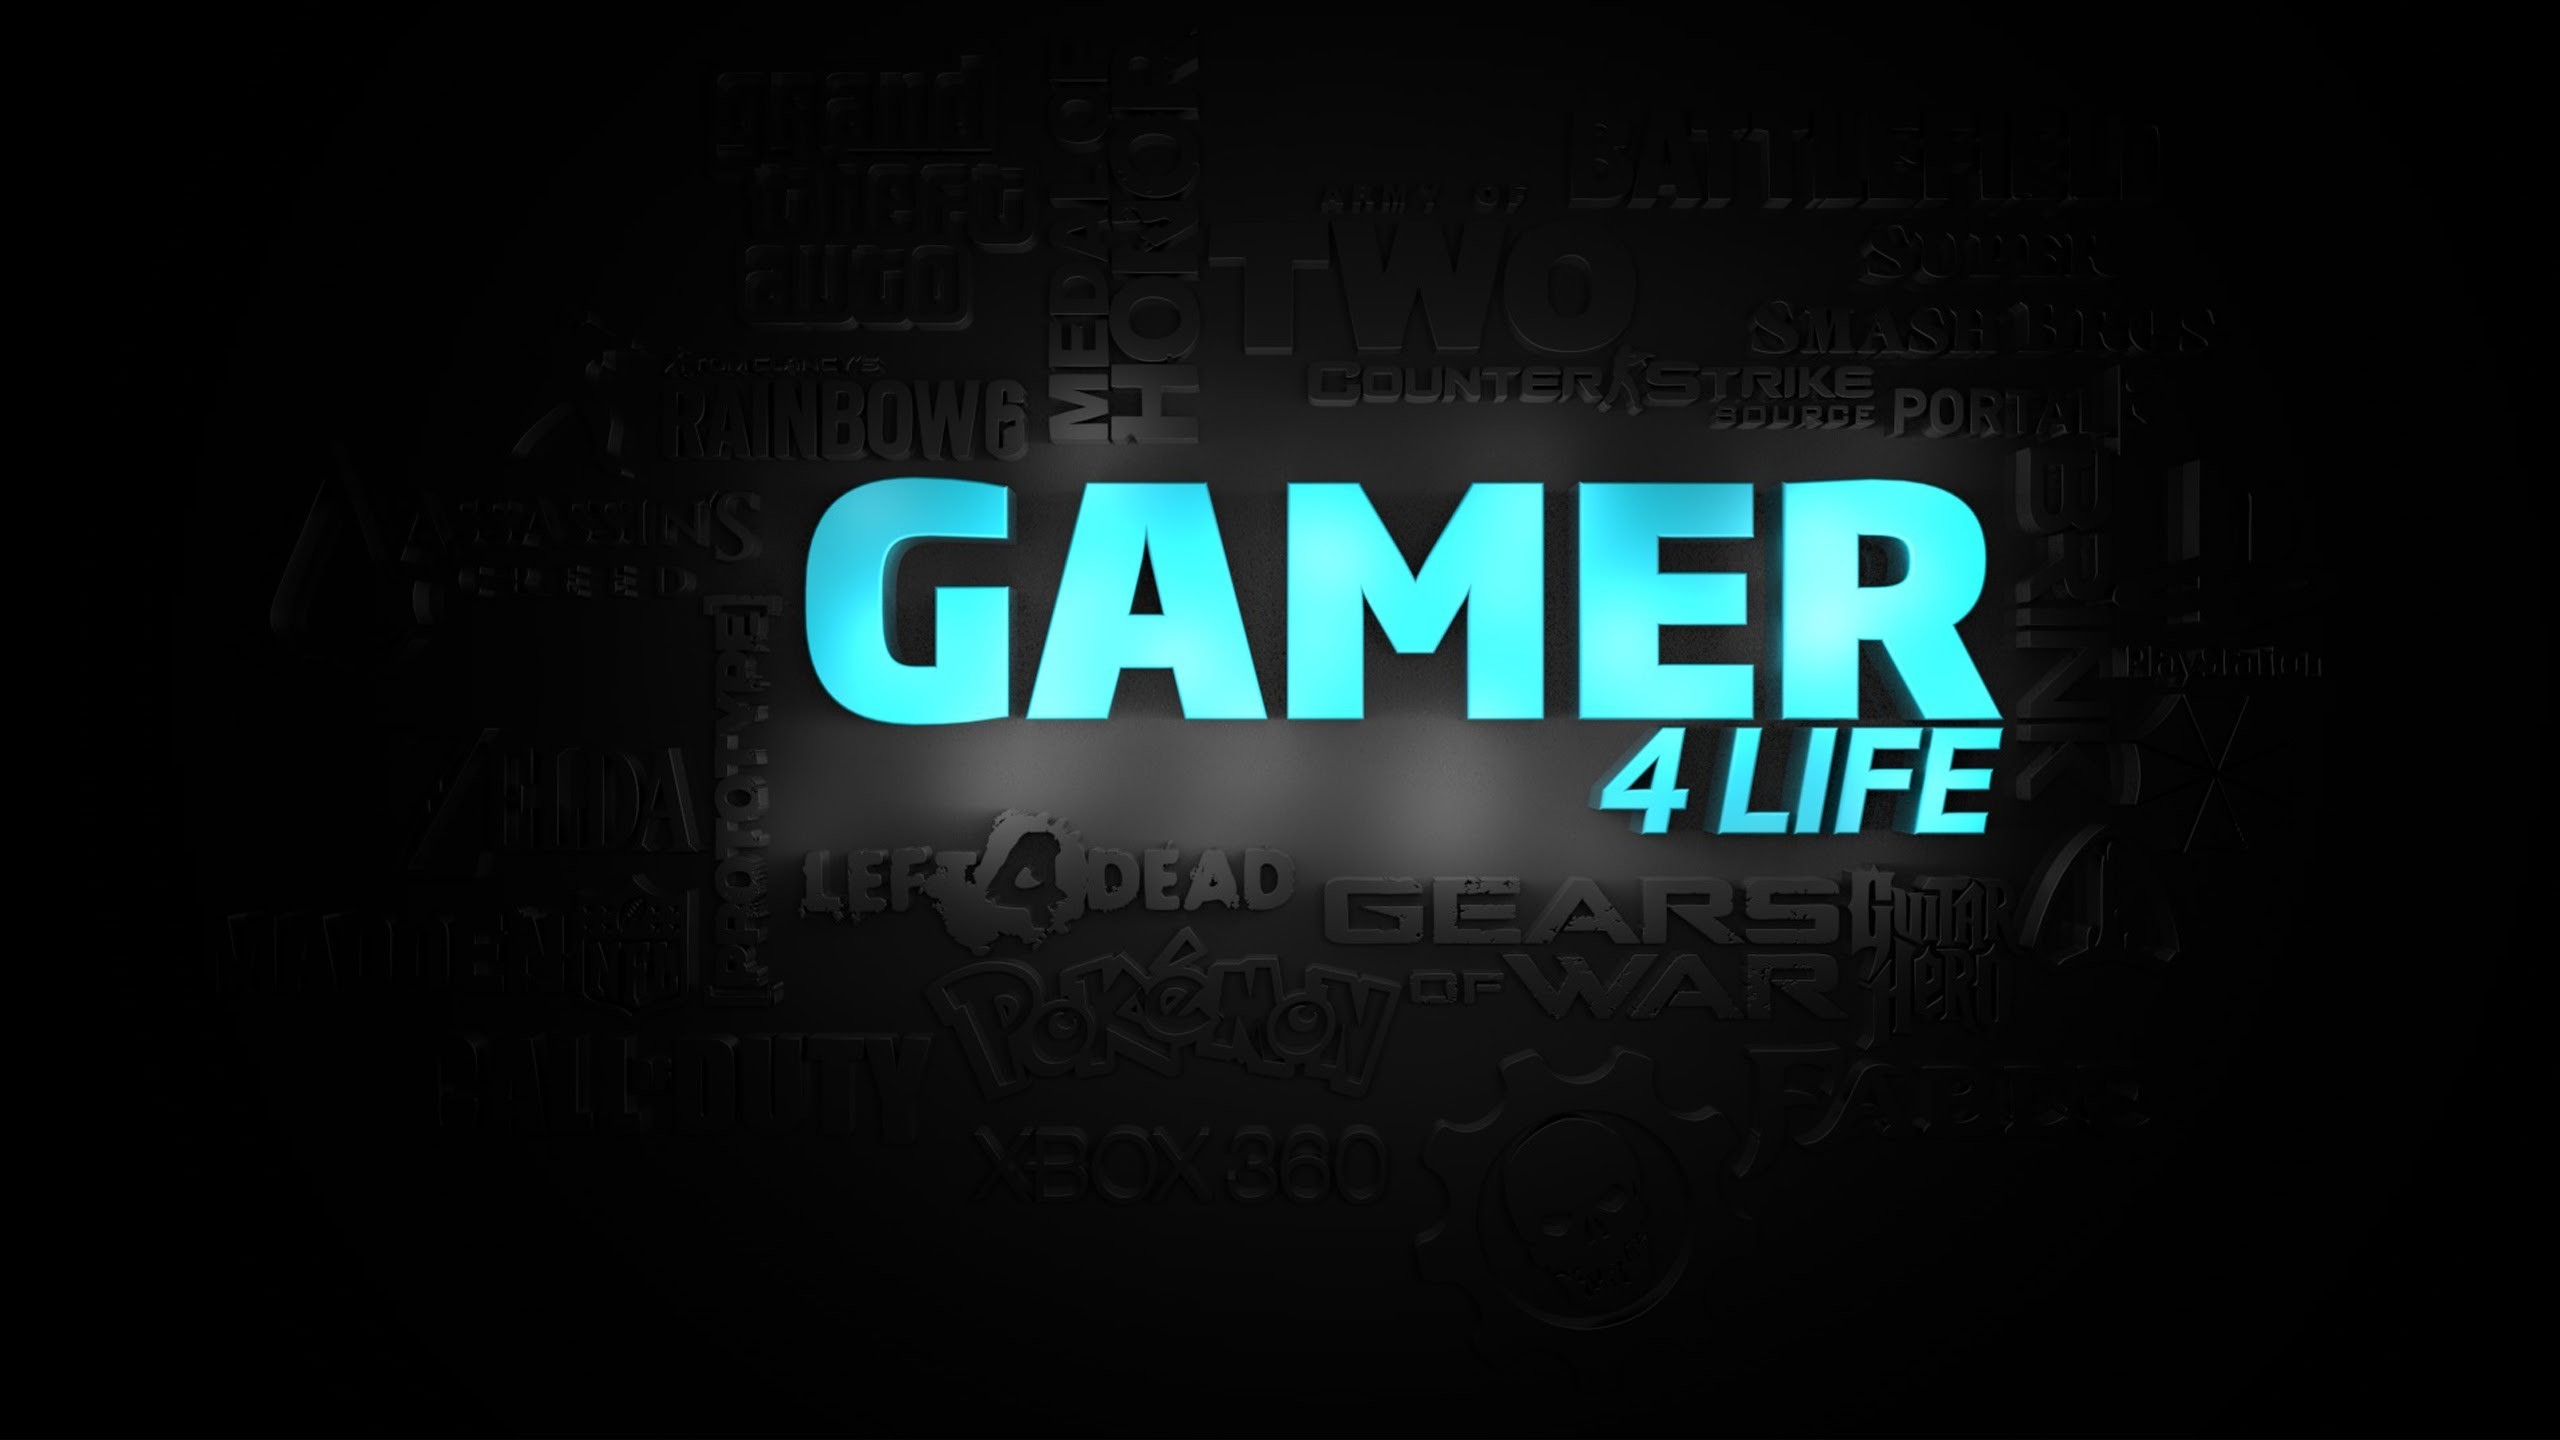 2560x1440 ... Gaming Is My Life Wallpaper 2560 X 1440 ...